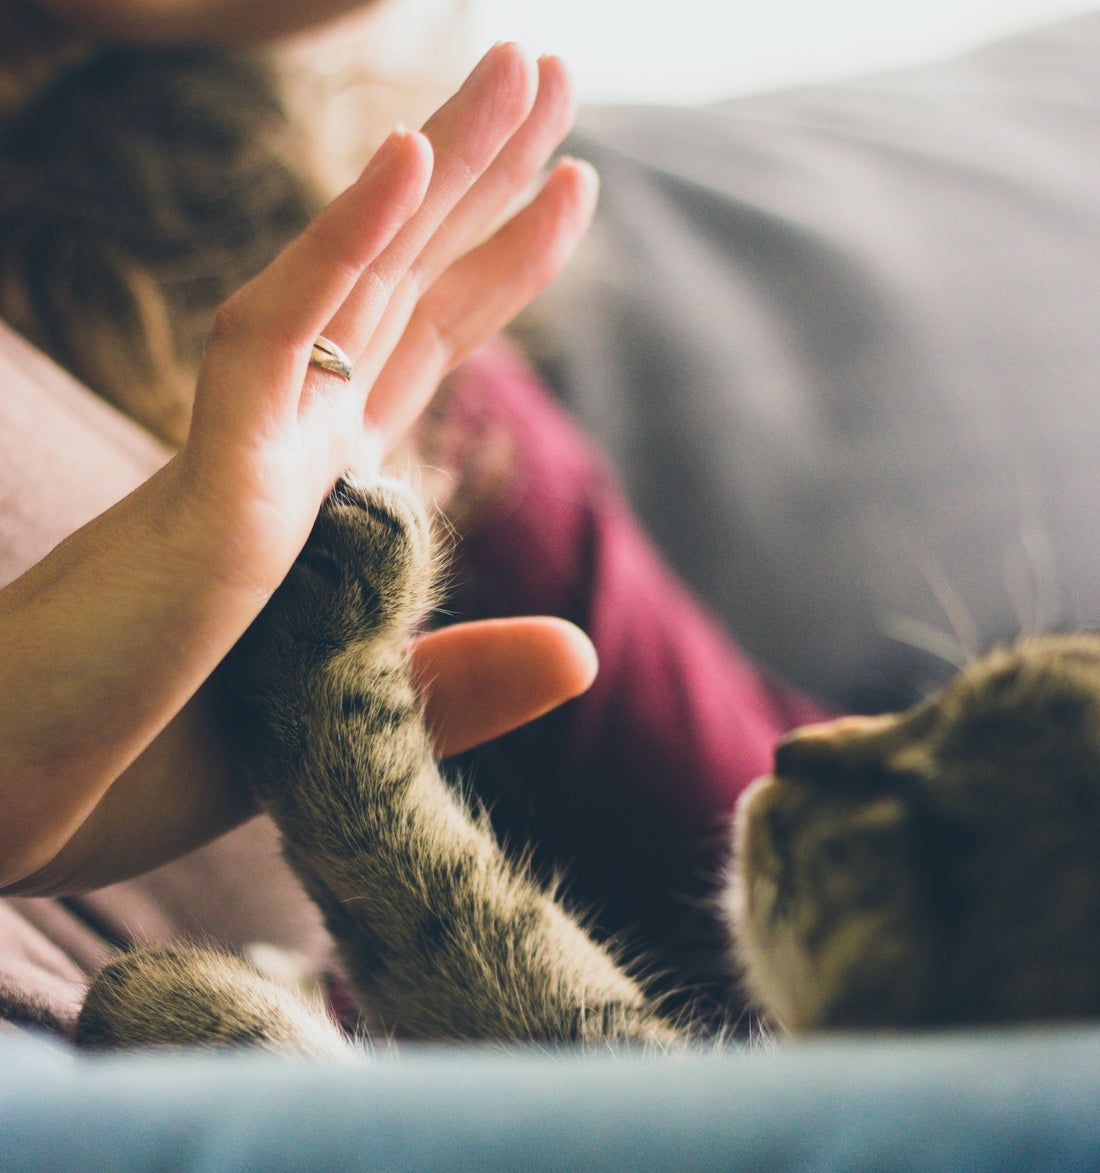 The Love and Devotion of Pet Parenting: Celebrating All Moms on Mother's Day